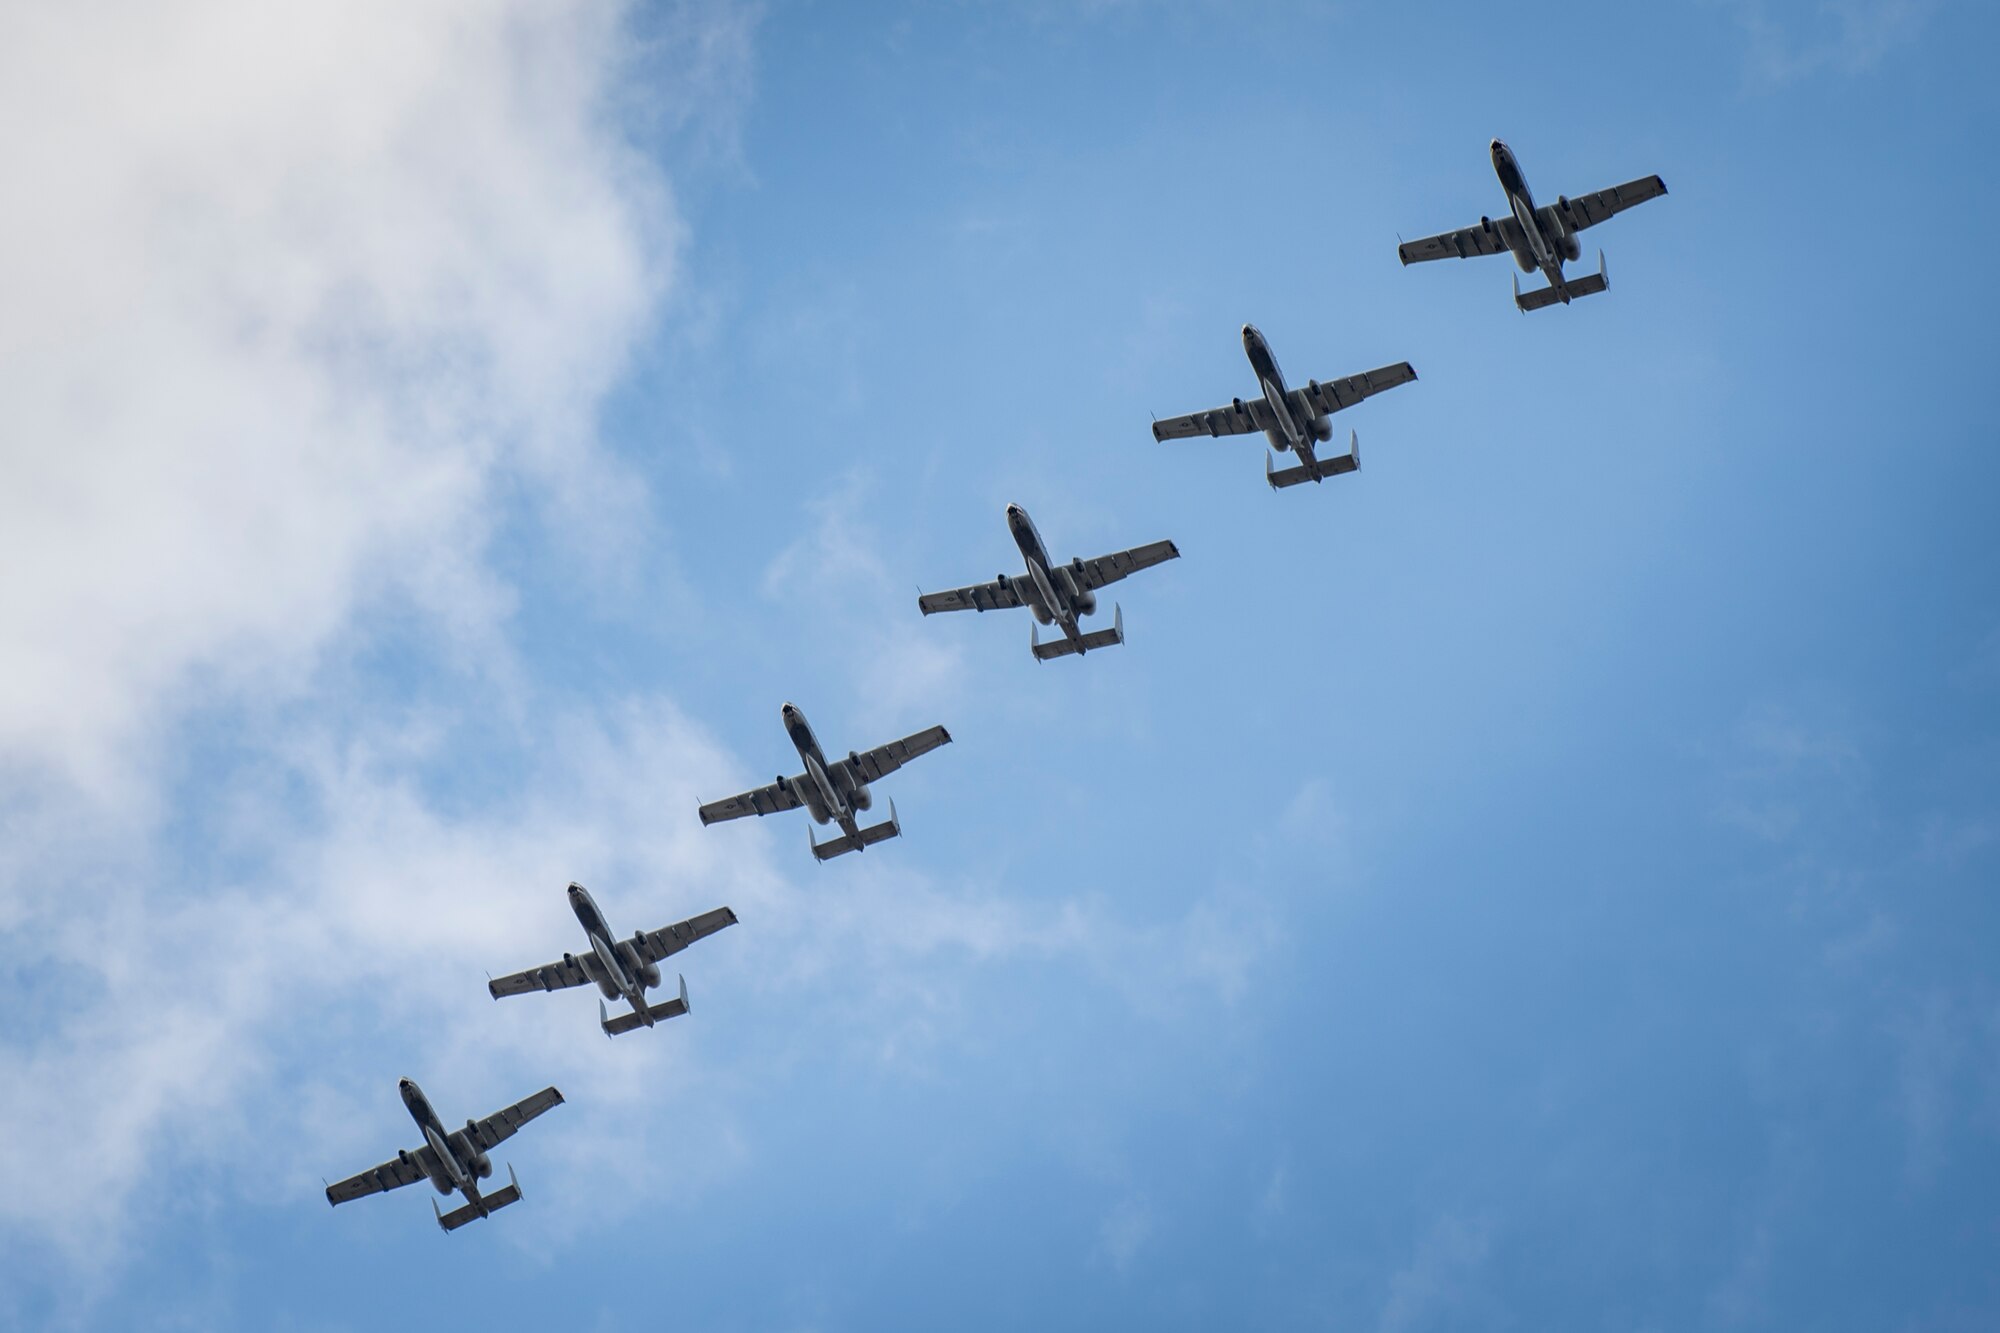 Six A-10C Thunderbolt IIs fly in formation over Moody Air Force Base, Ga. during a return from deployment, Jan. 26, 2018. More than 300 Airmen from Moody deployed for seven months in support of Operation Inherent Resolve to defeat ISIS in designated areas in Iraq and Syria. (U.S. Air Force photo by Tech. Sgt. Zachary Wolf)